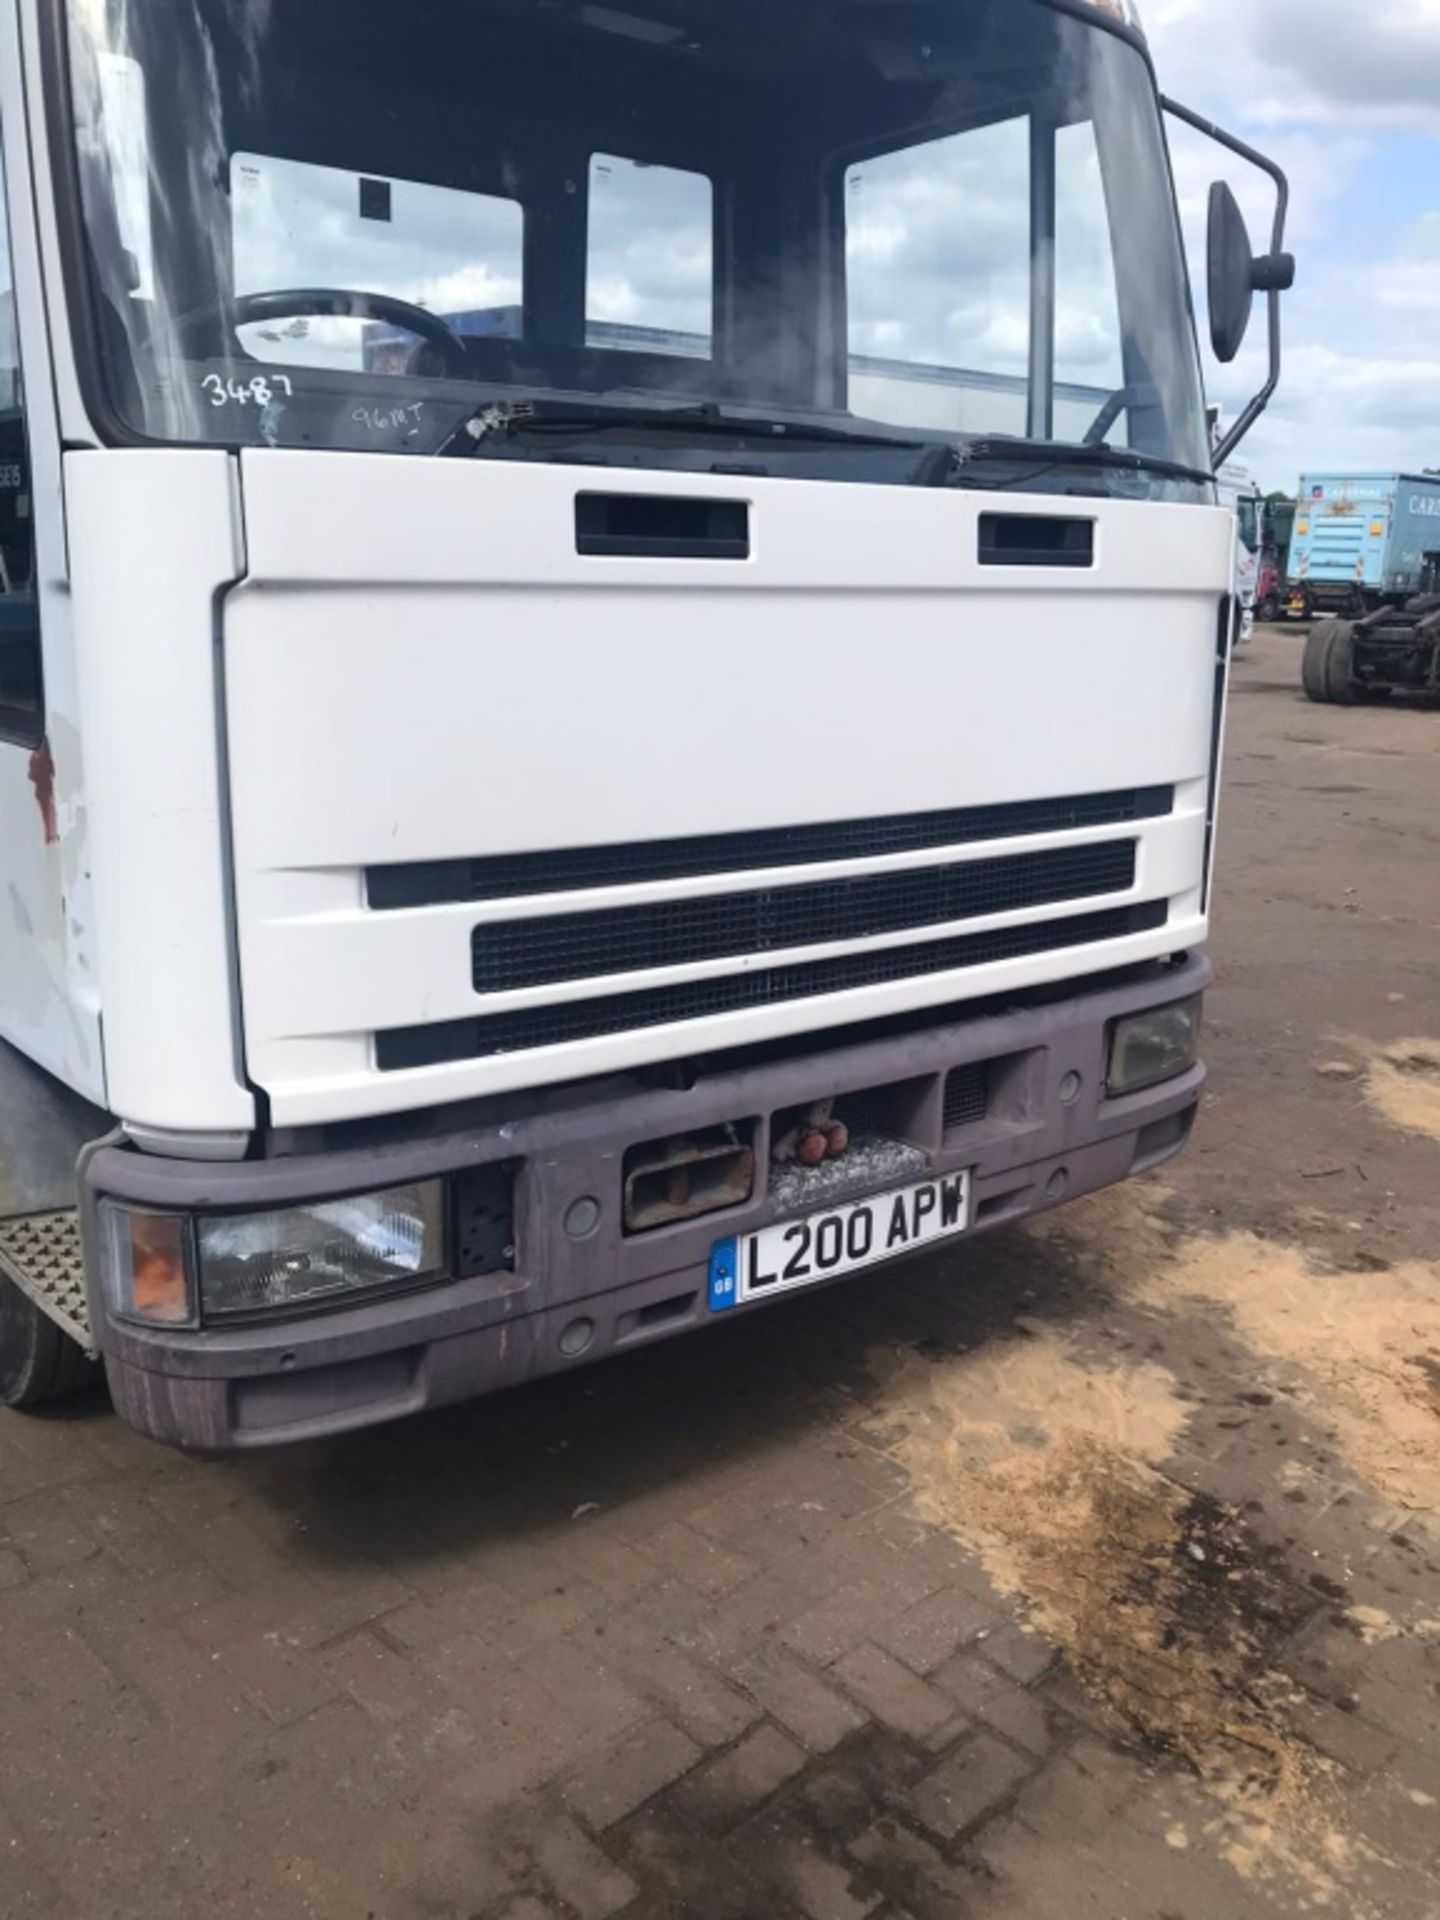 1998 Iveco Ford beaver tail Truck - Image 2 of 11